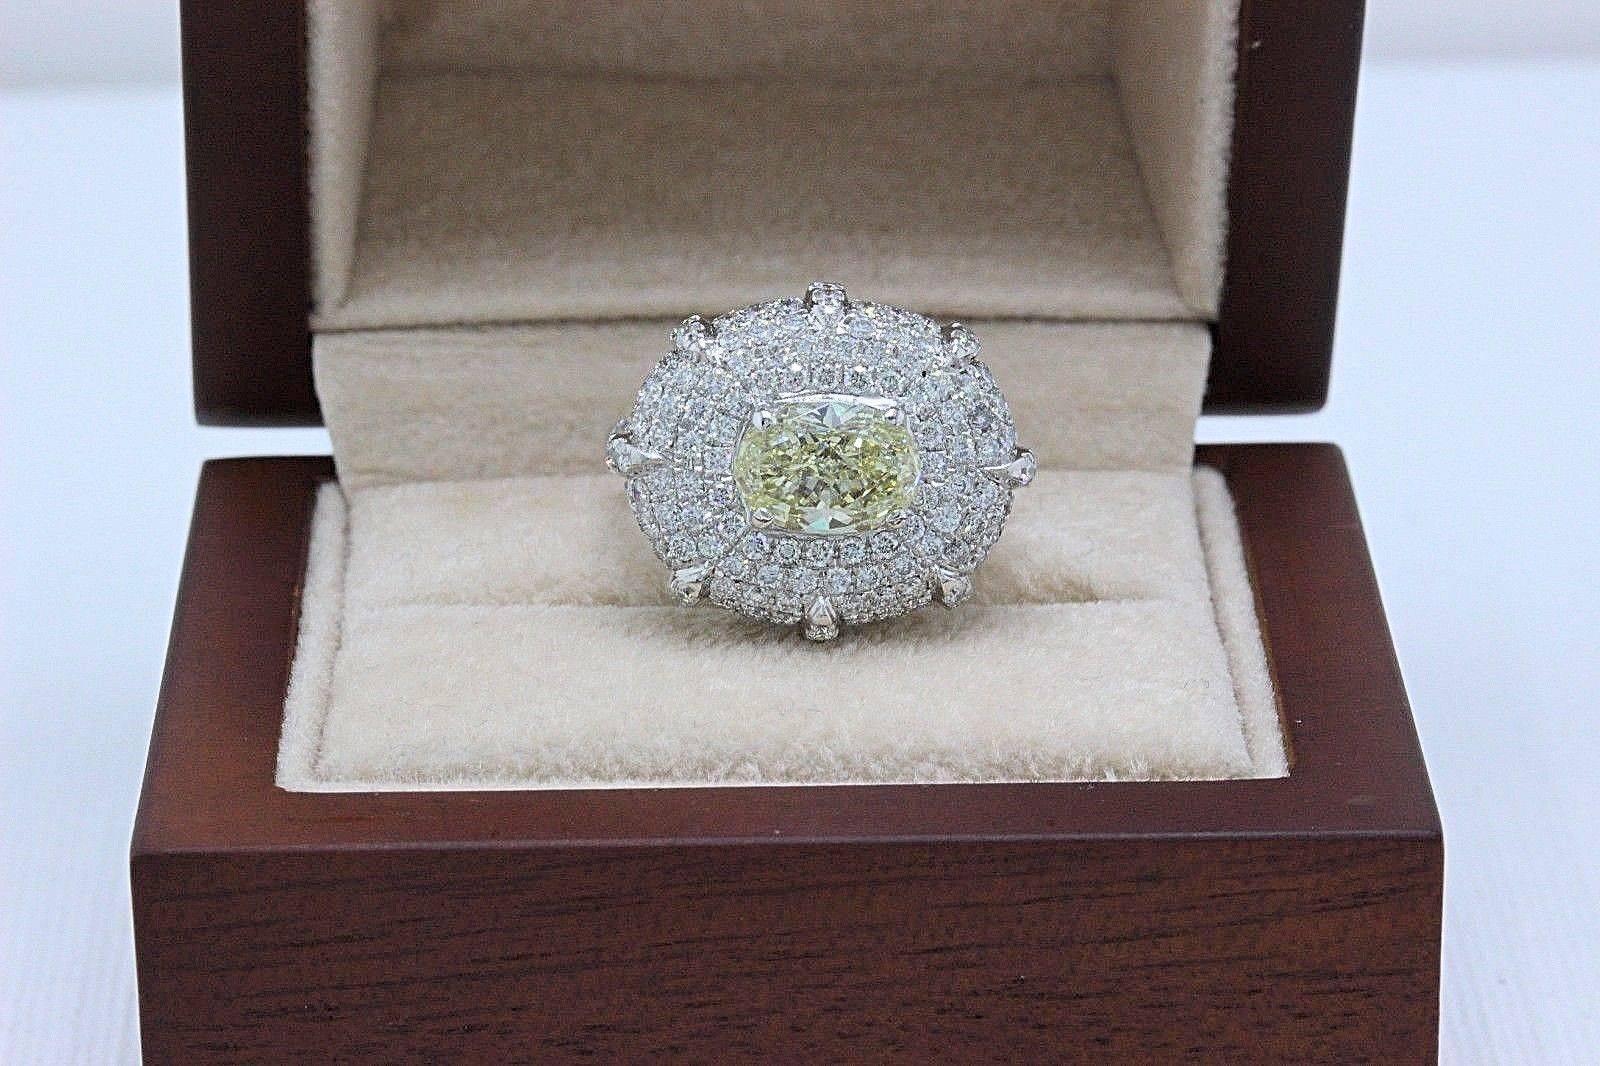 Light Yellow Oval Diamond Engagement Ring 
Style:  Pave Diamonds With Solitaire
Metal:  18KT Yellow Gold
Size:  4.75 - Sizable
Total Carat Weight:  4.24 TCW
Diamond Shape:  Oval 1.74 CTS
Diamond Color & Clarity:  Light Yellow / VS2 - SI1
Accent